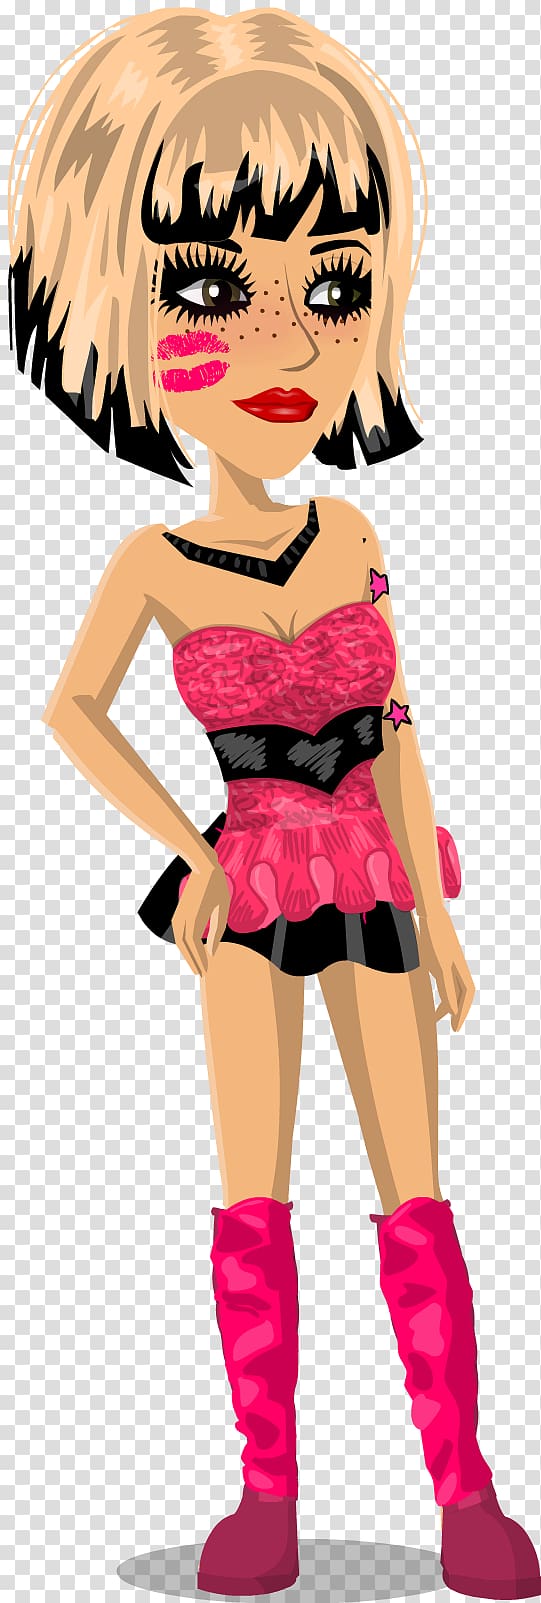 MovieStarPlanet Clothing Pin Game Information, aesthetic msp girl transparent background PNG clipart